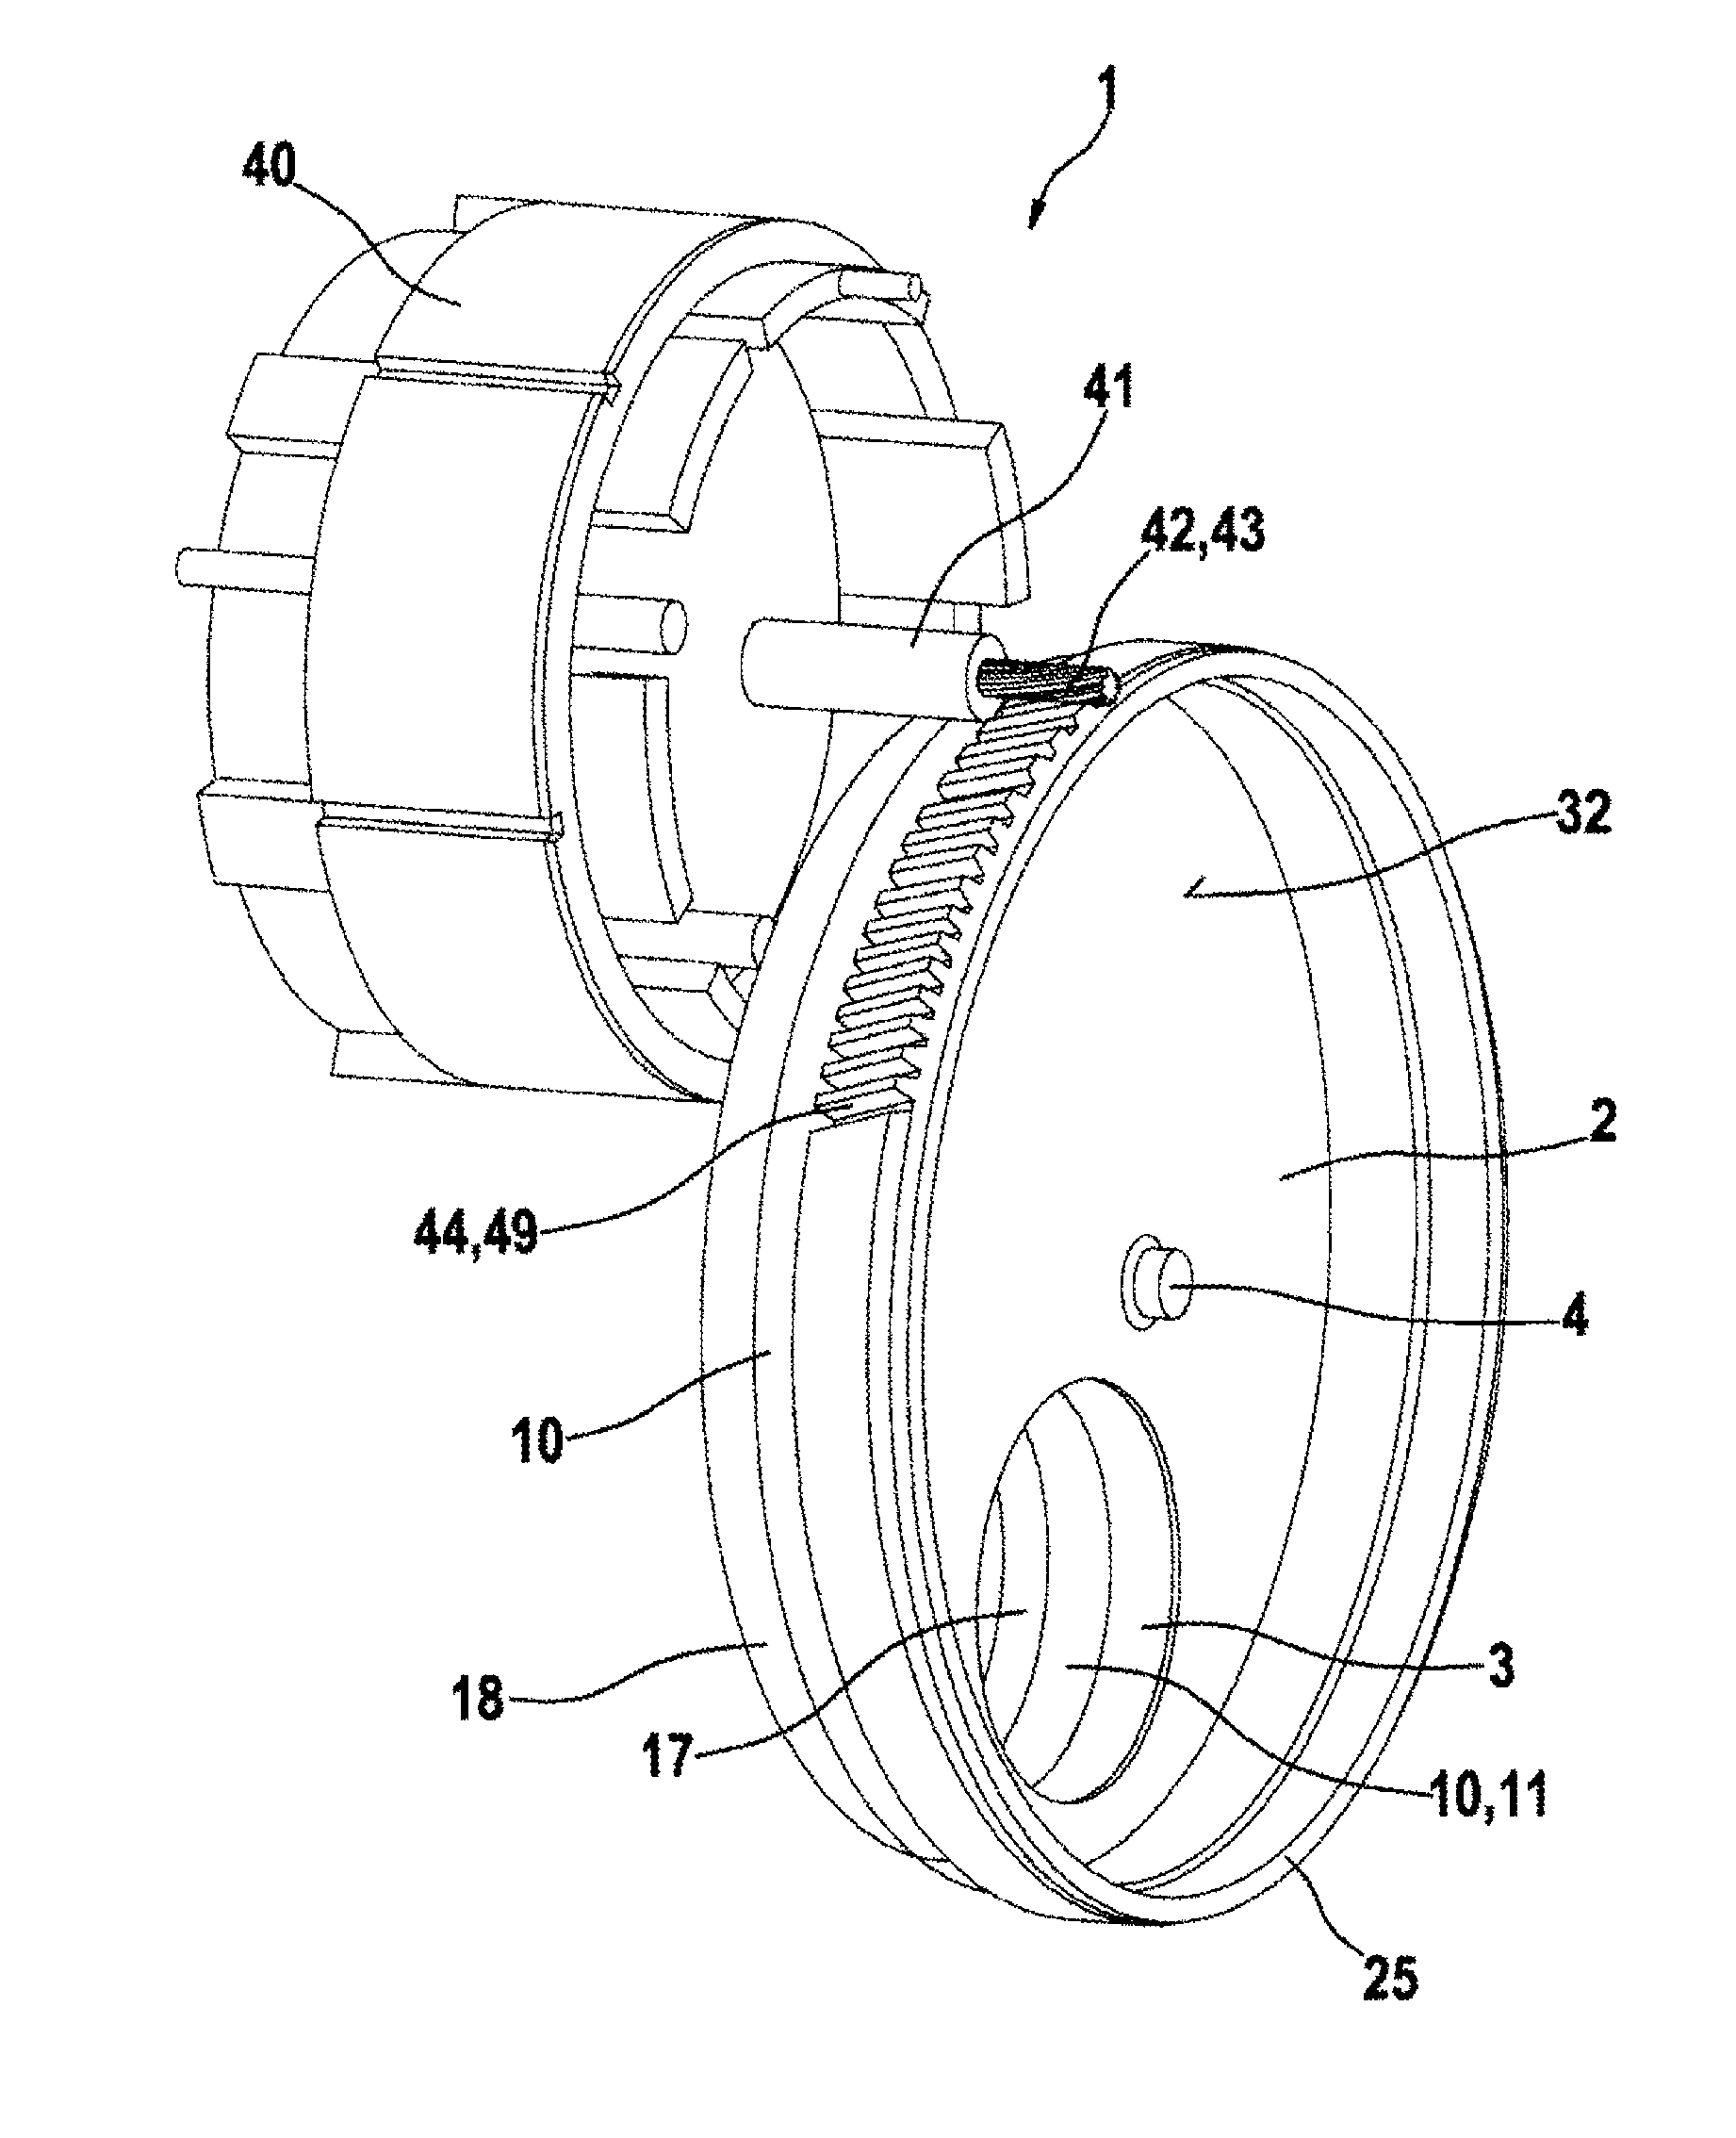 Valve for controlling volume flows